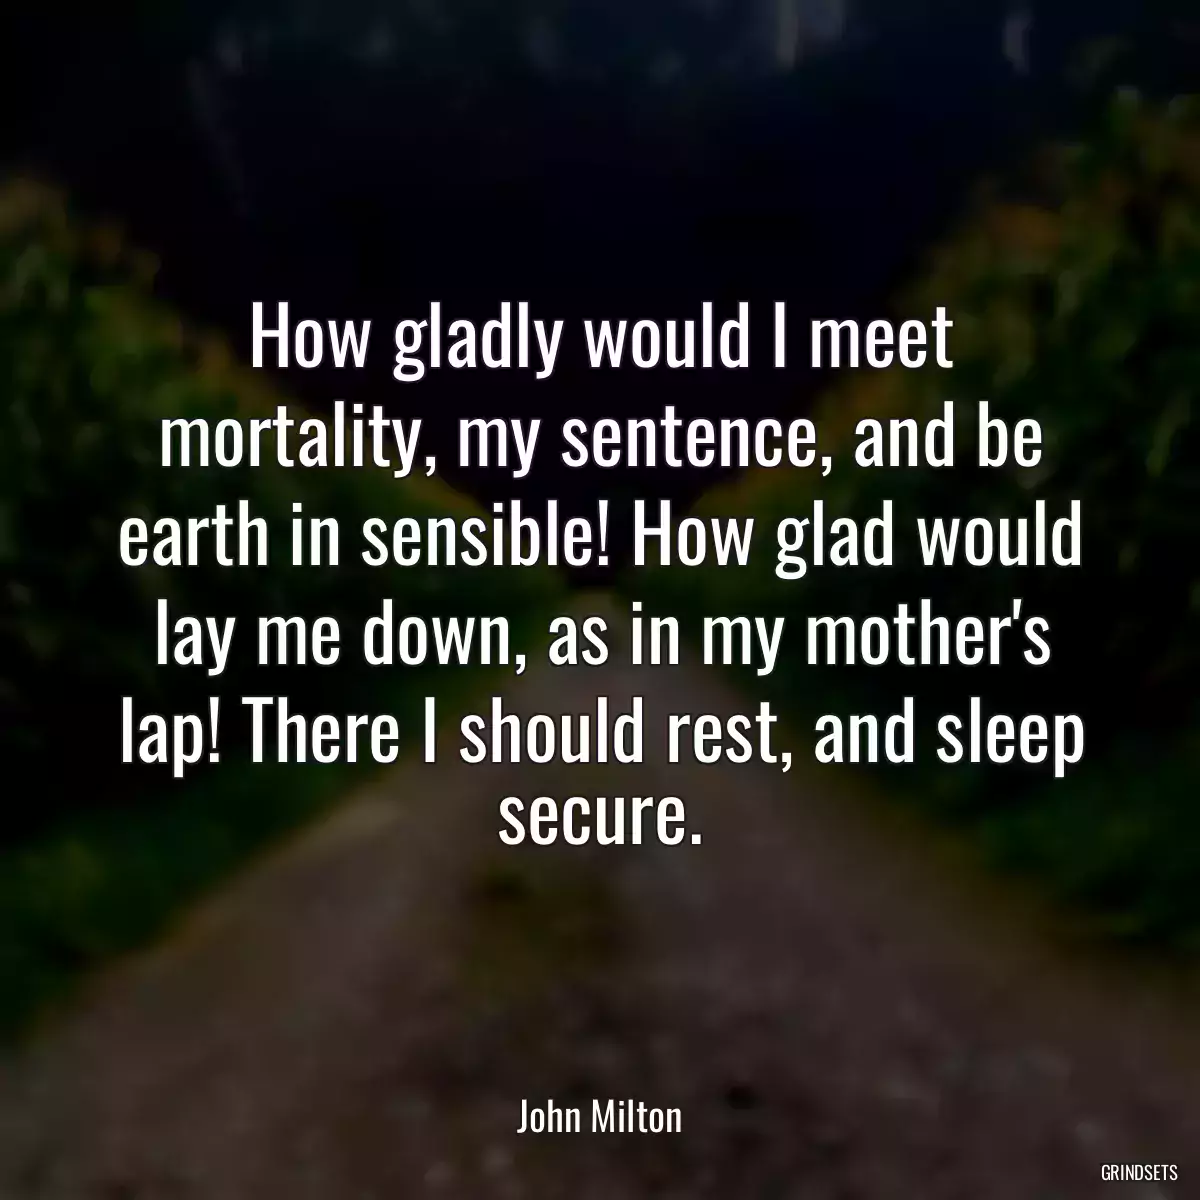 How gladly would I meet mortality, my sentence, and be earth in sensible! How glad would lay me down, as in my mother\'s lap! There I should rest, and sleep secure.